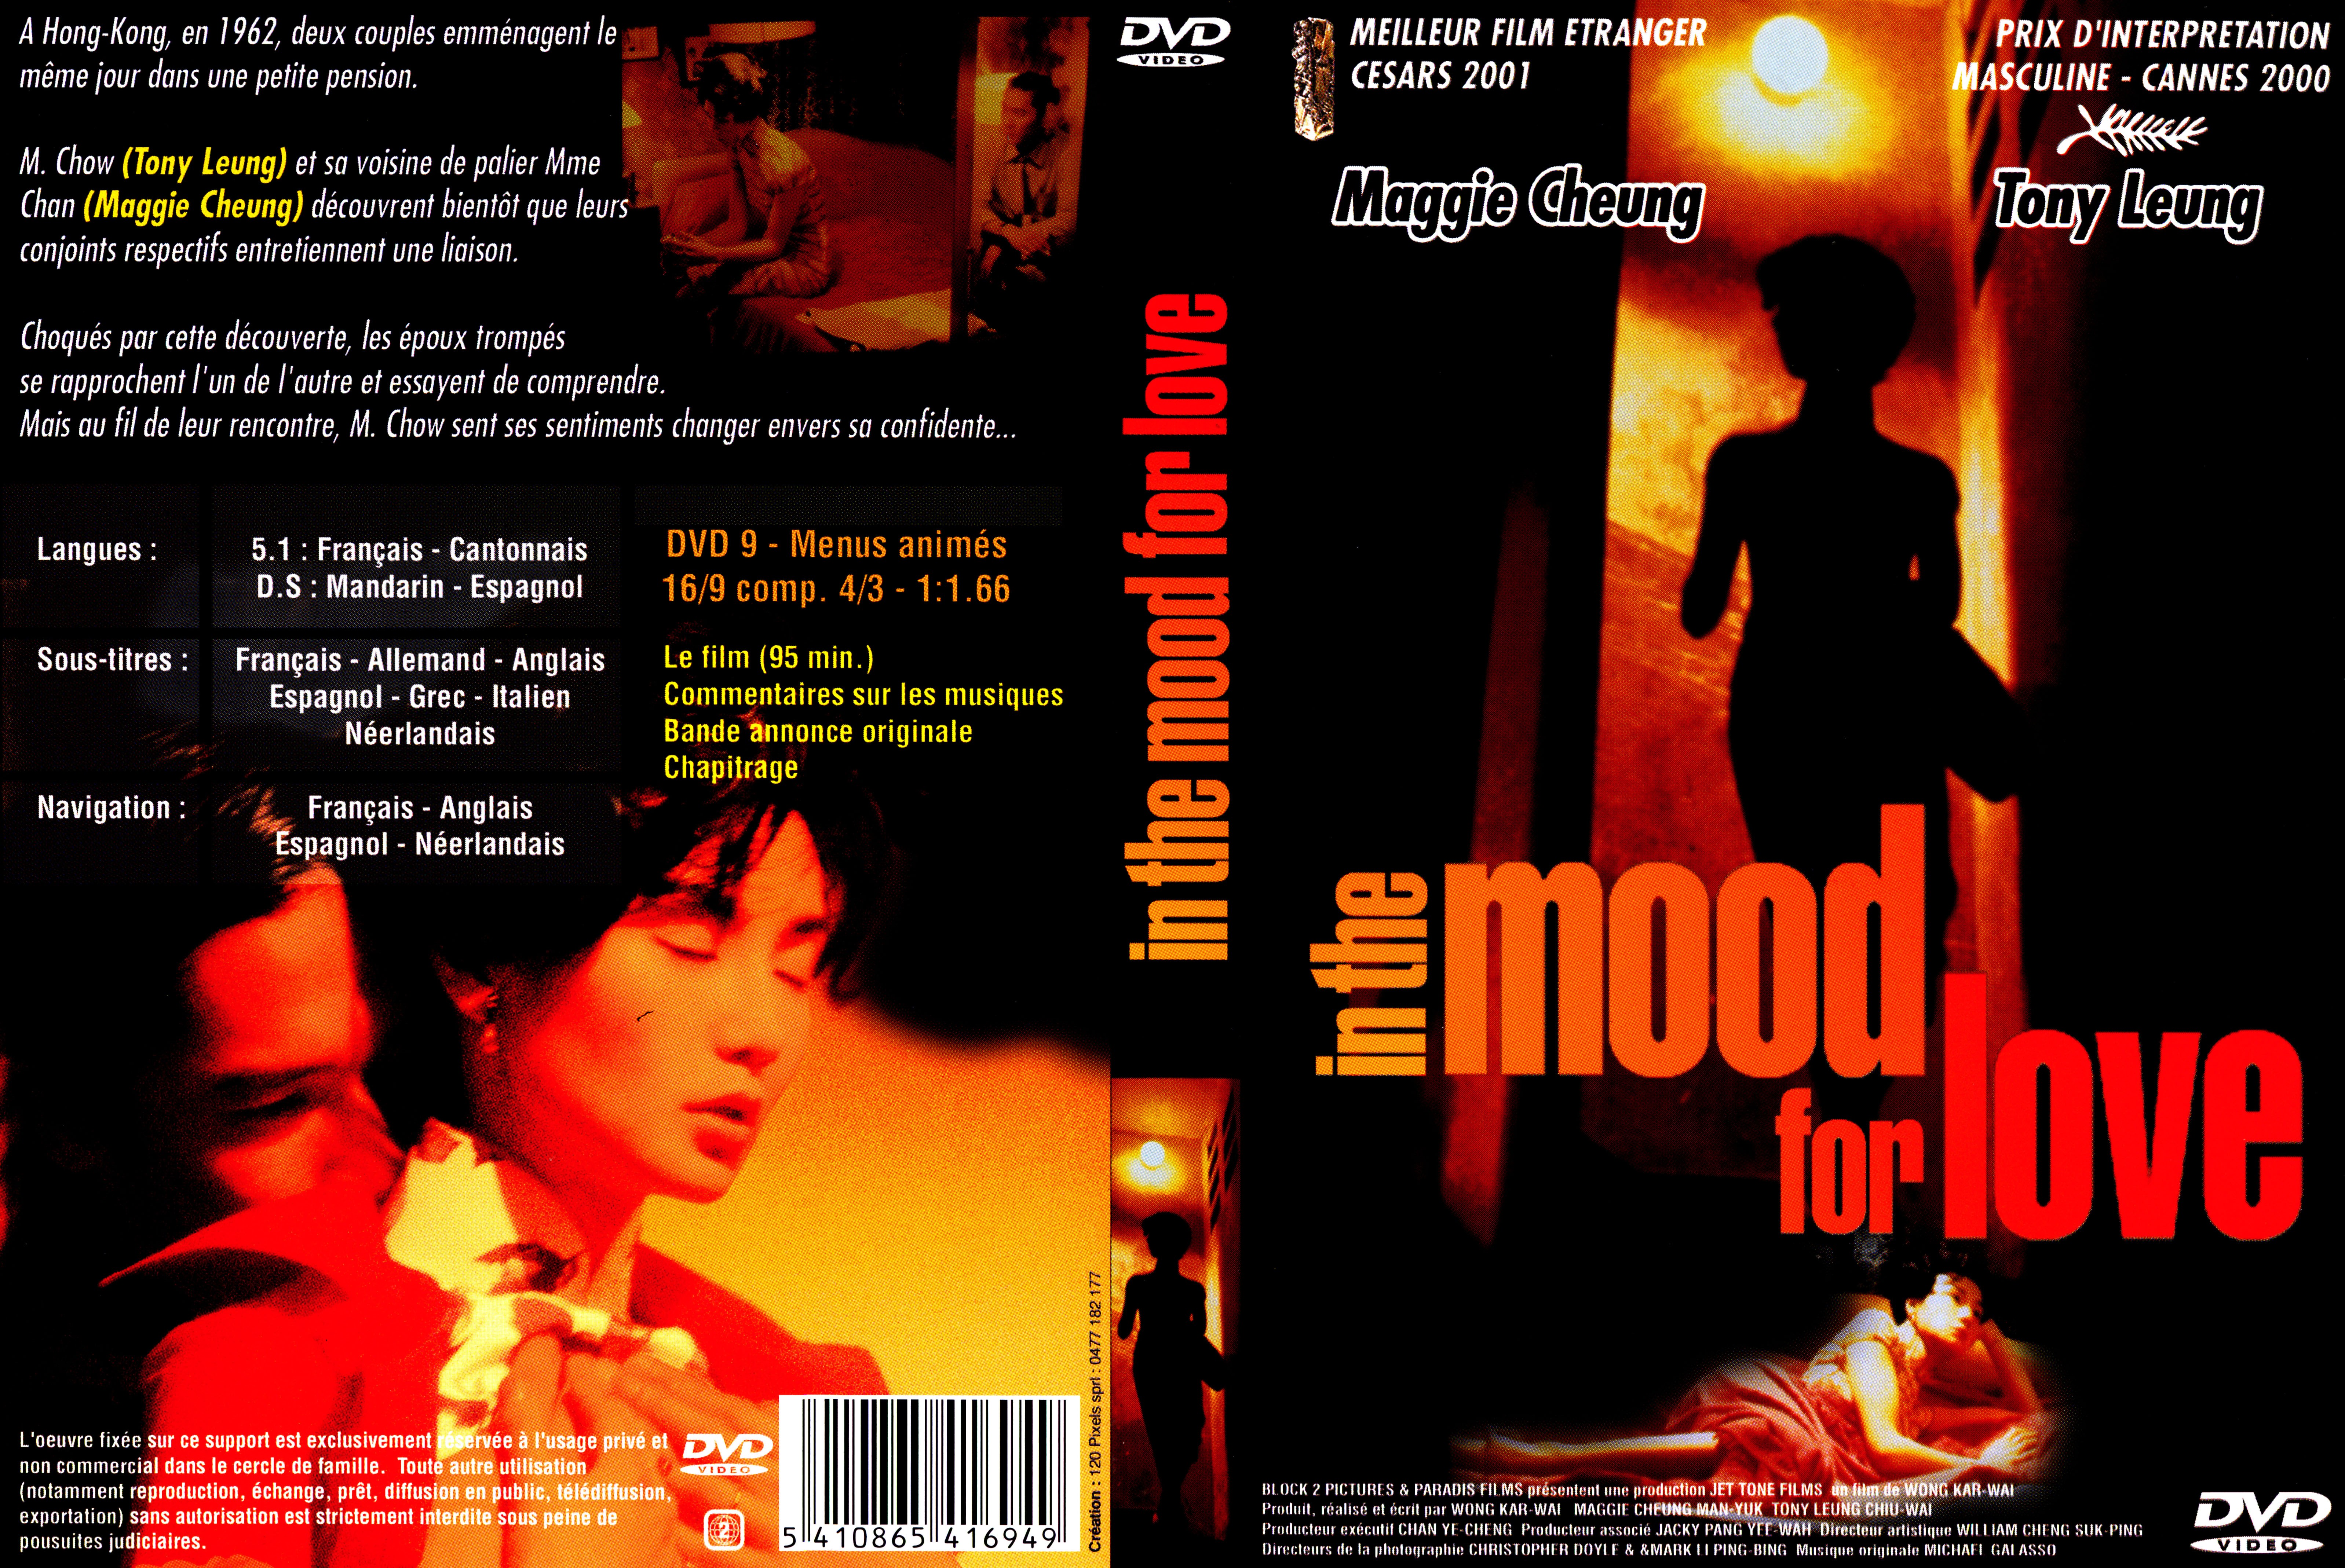 Jaquette DVD In the mood for love